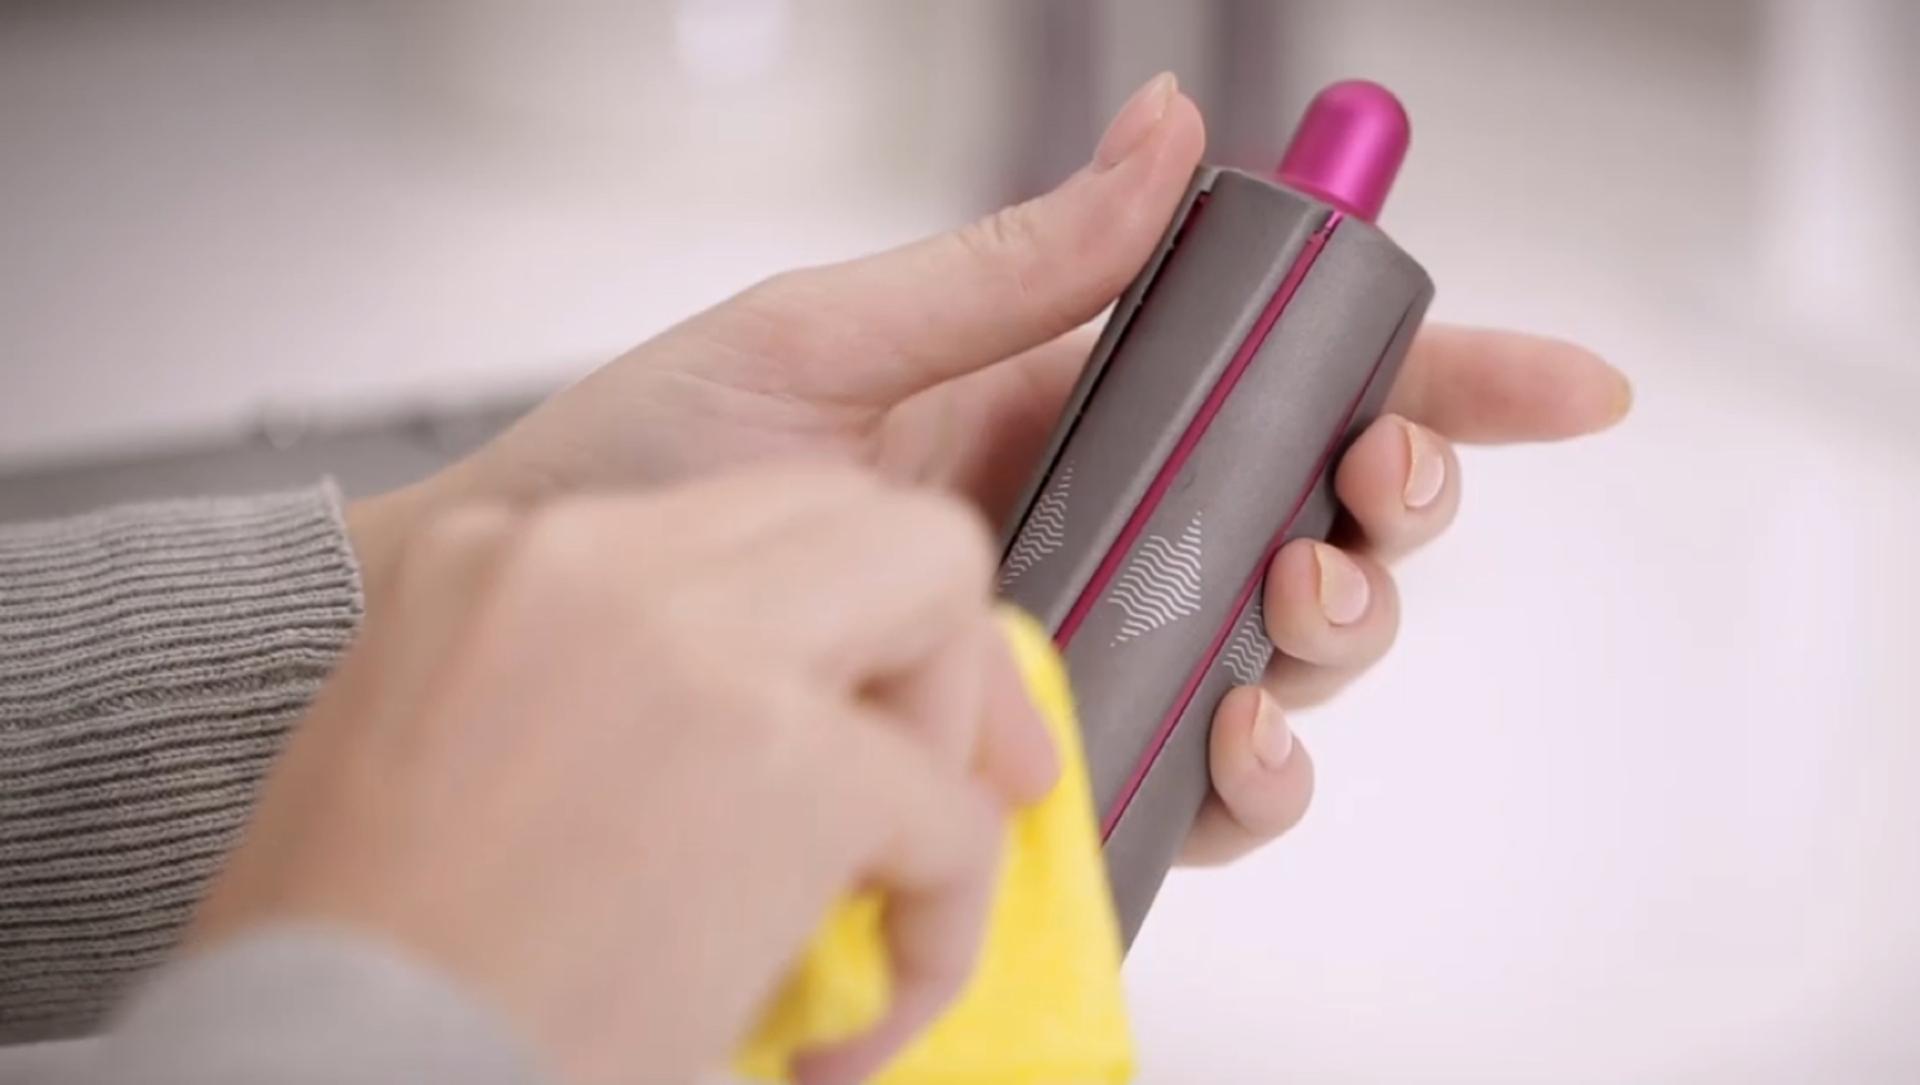 Video showing how to clean the Dyson Airwrap styler's attachments 